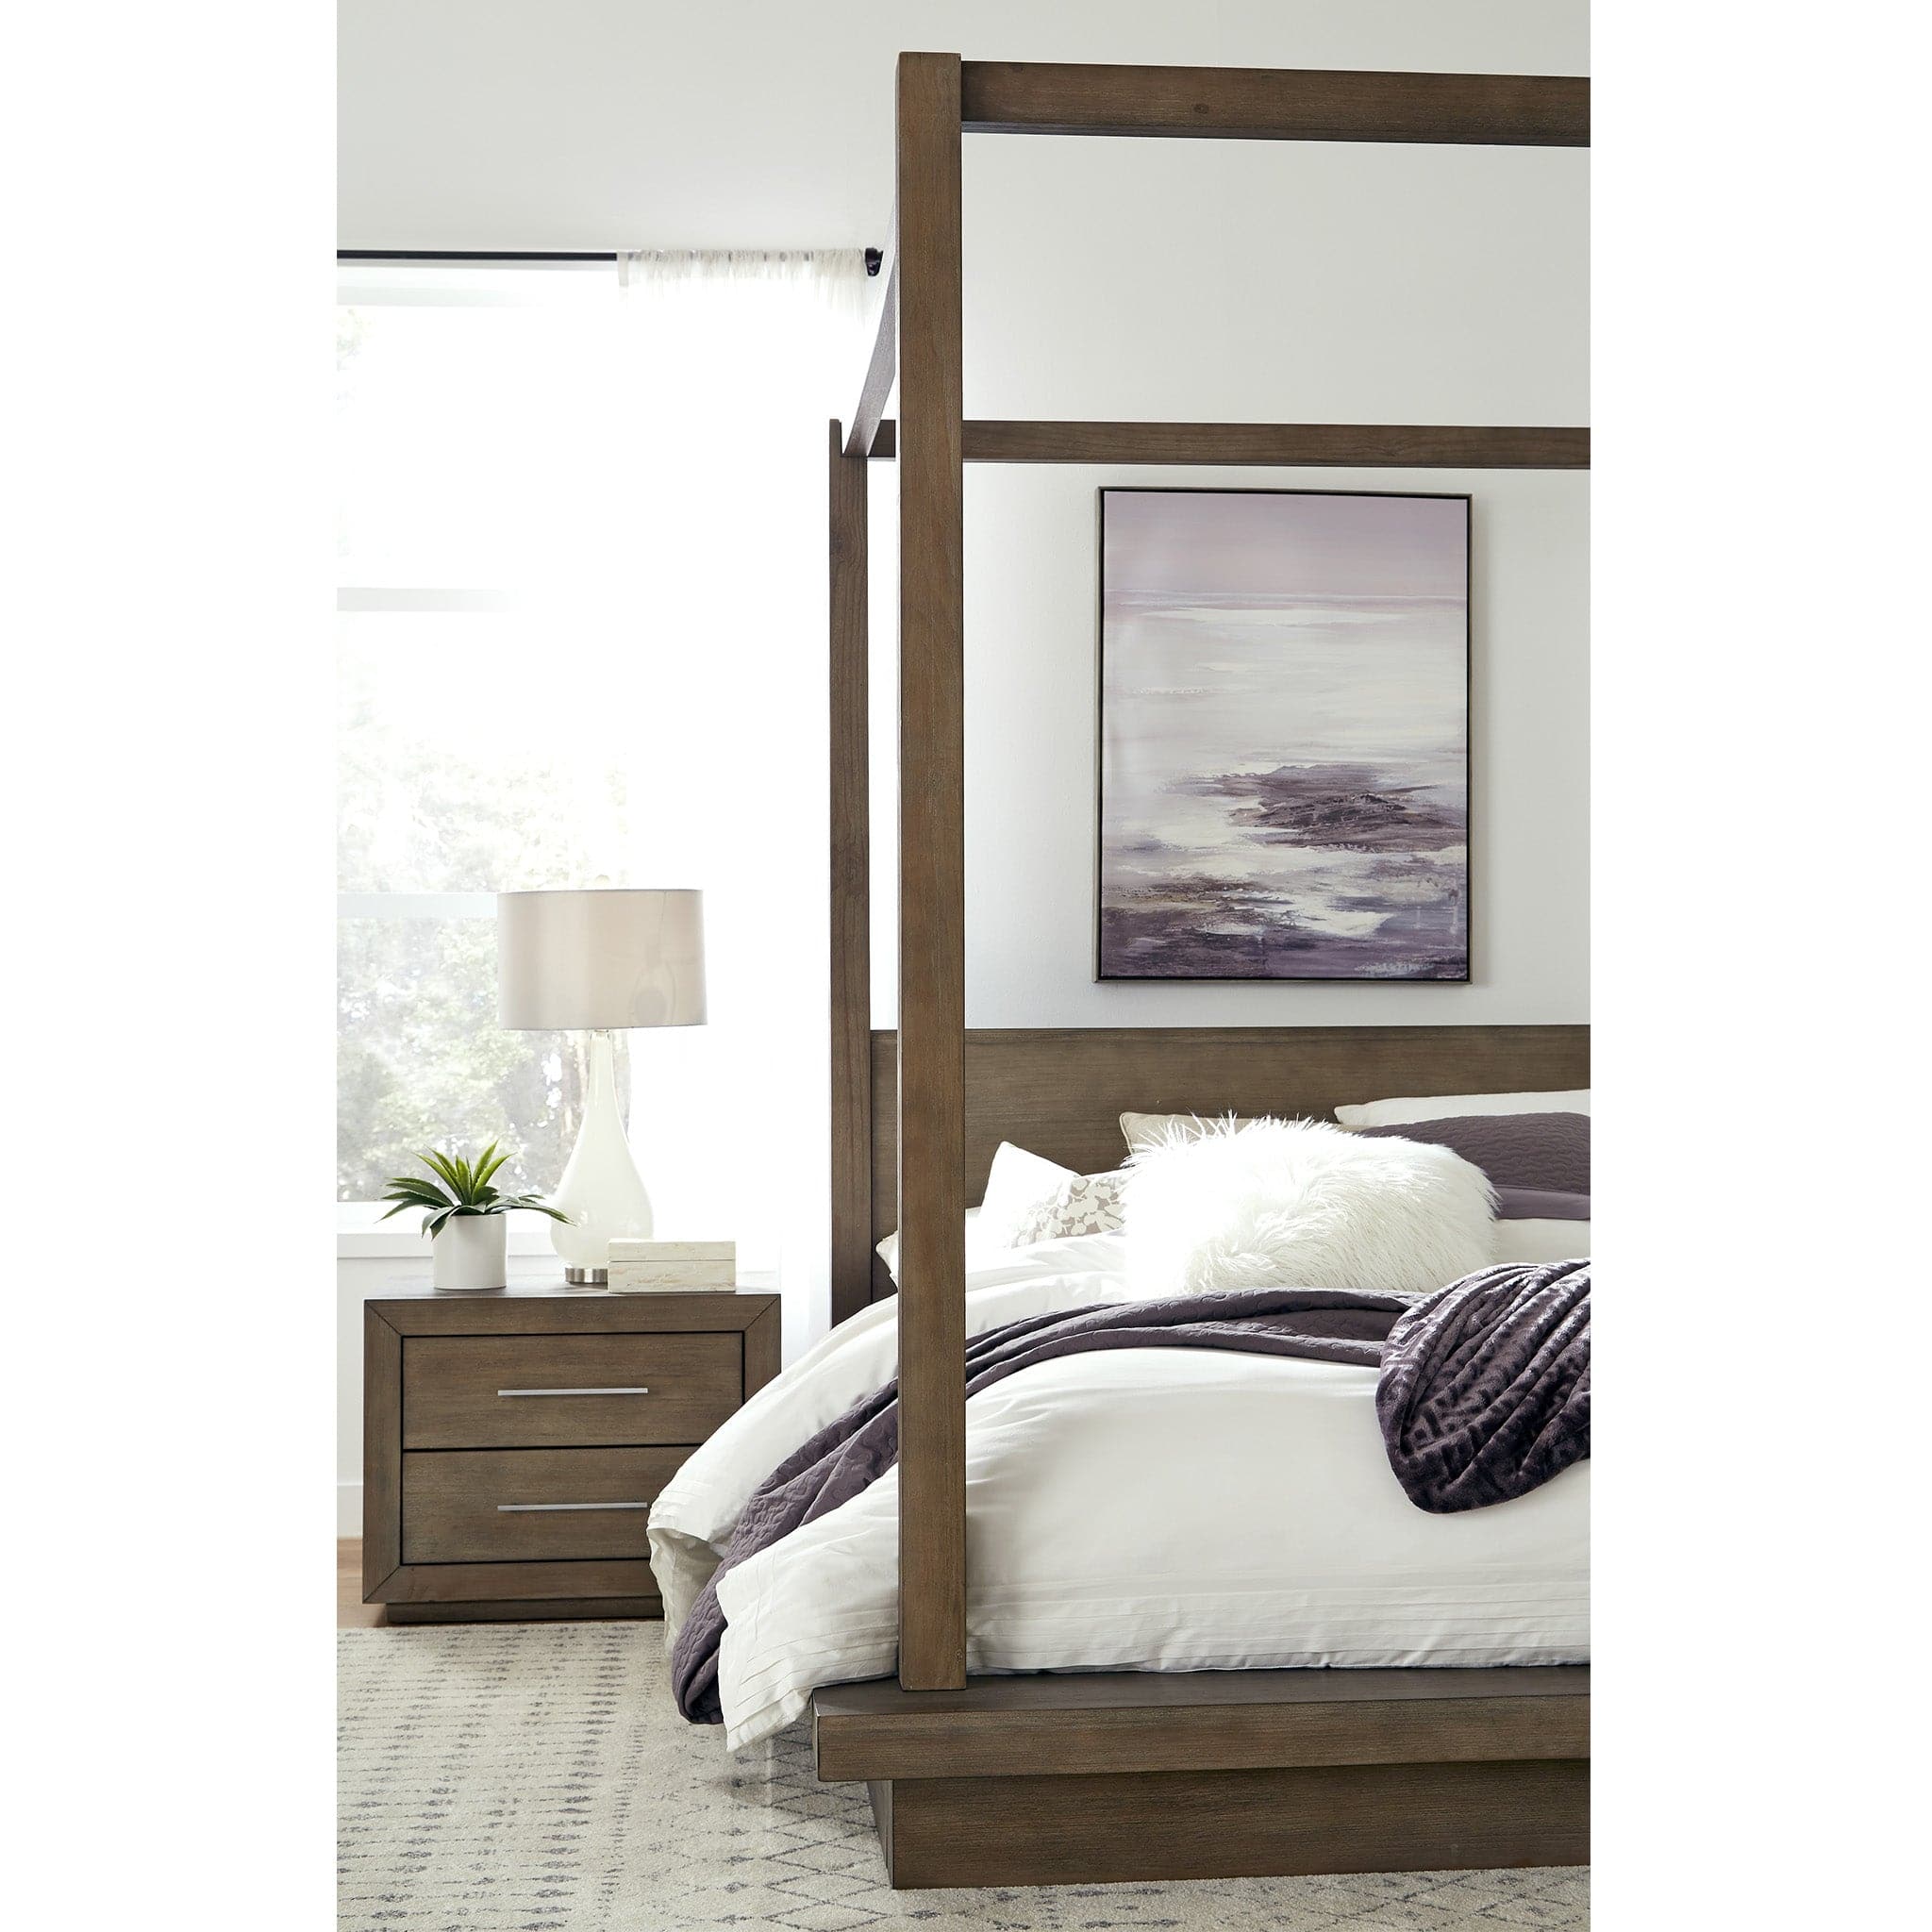 Melbourne Canopy Bed